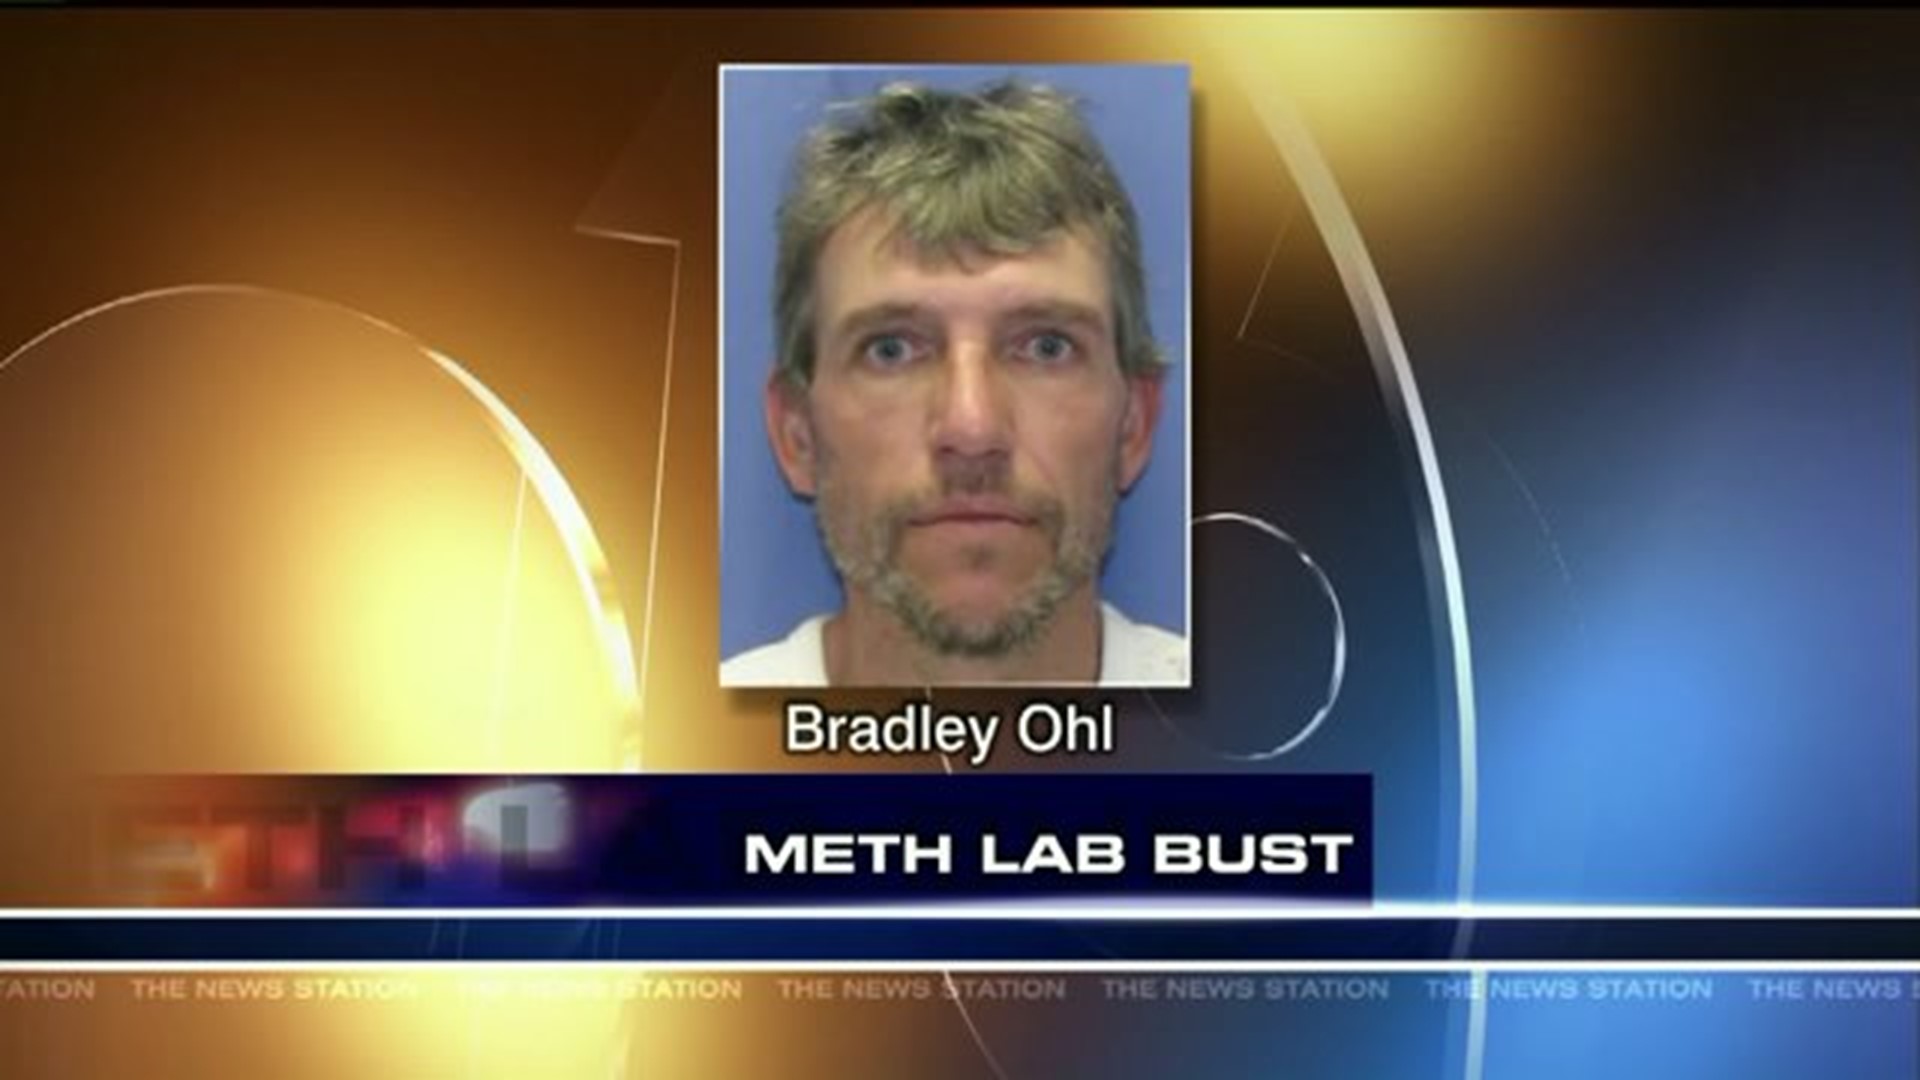 Man Charged After Meth Lab Bust in Berwick